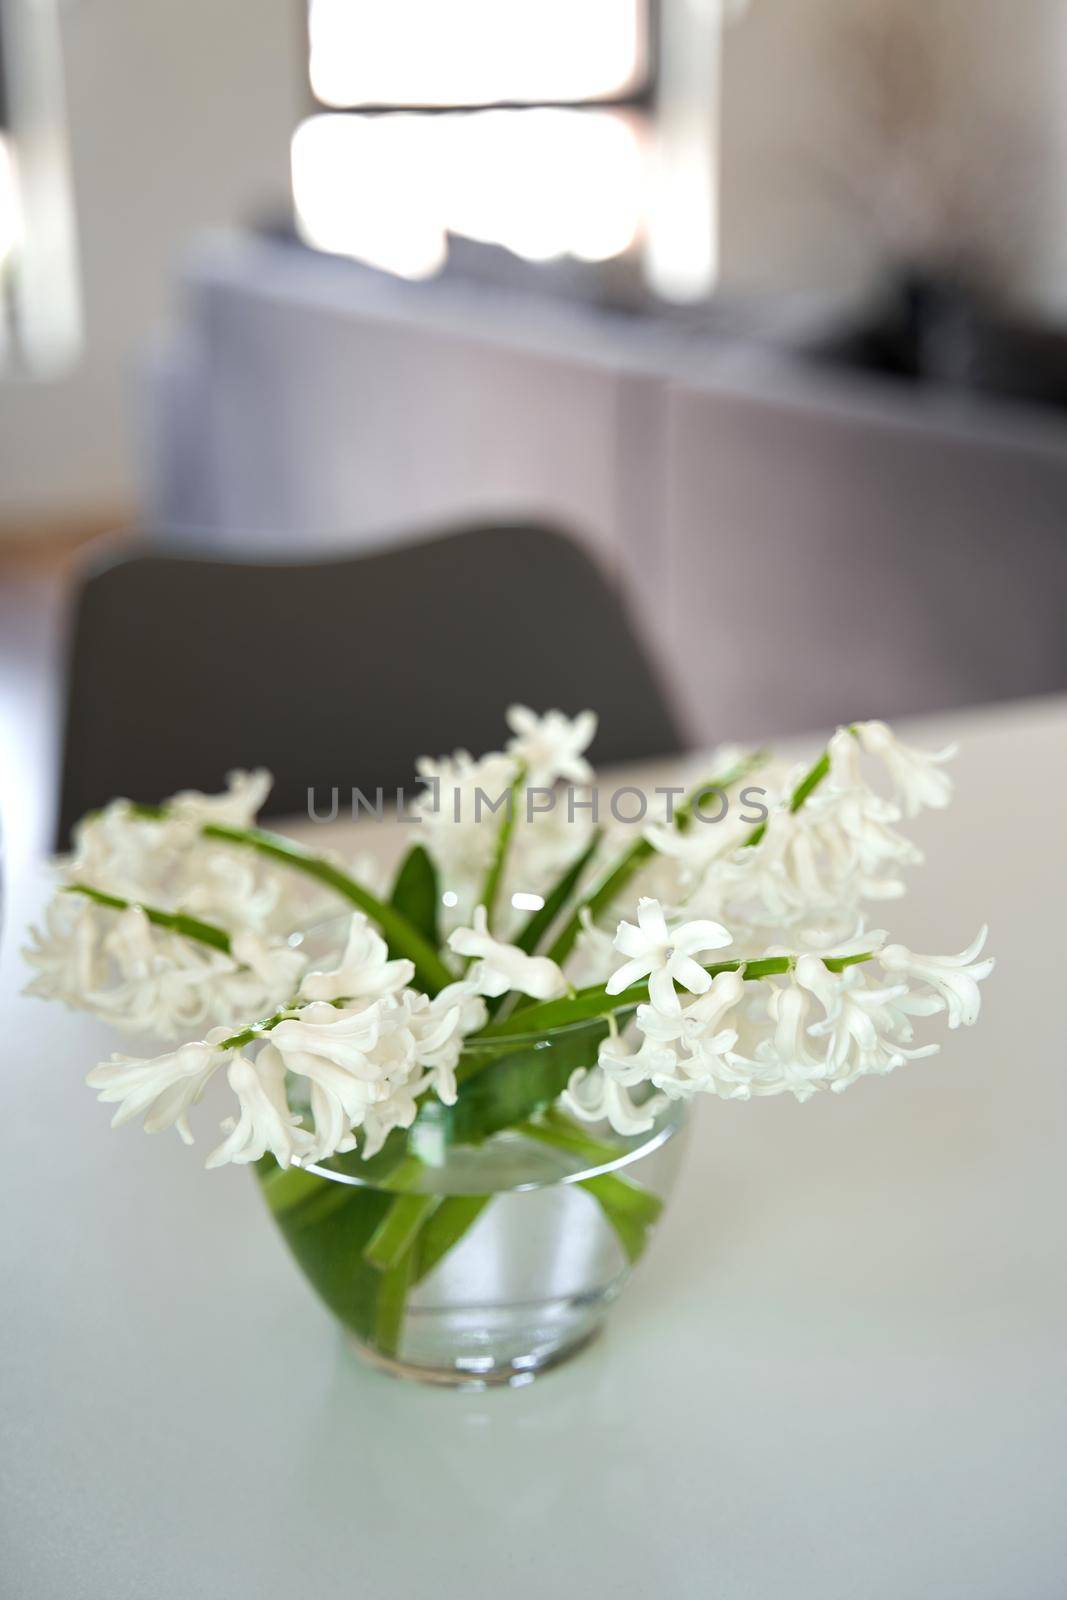 White living room interior decorated with fresh flowers in glass vase.